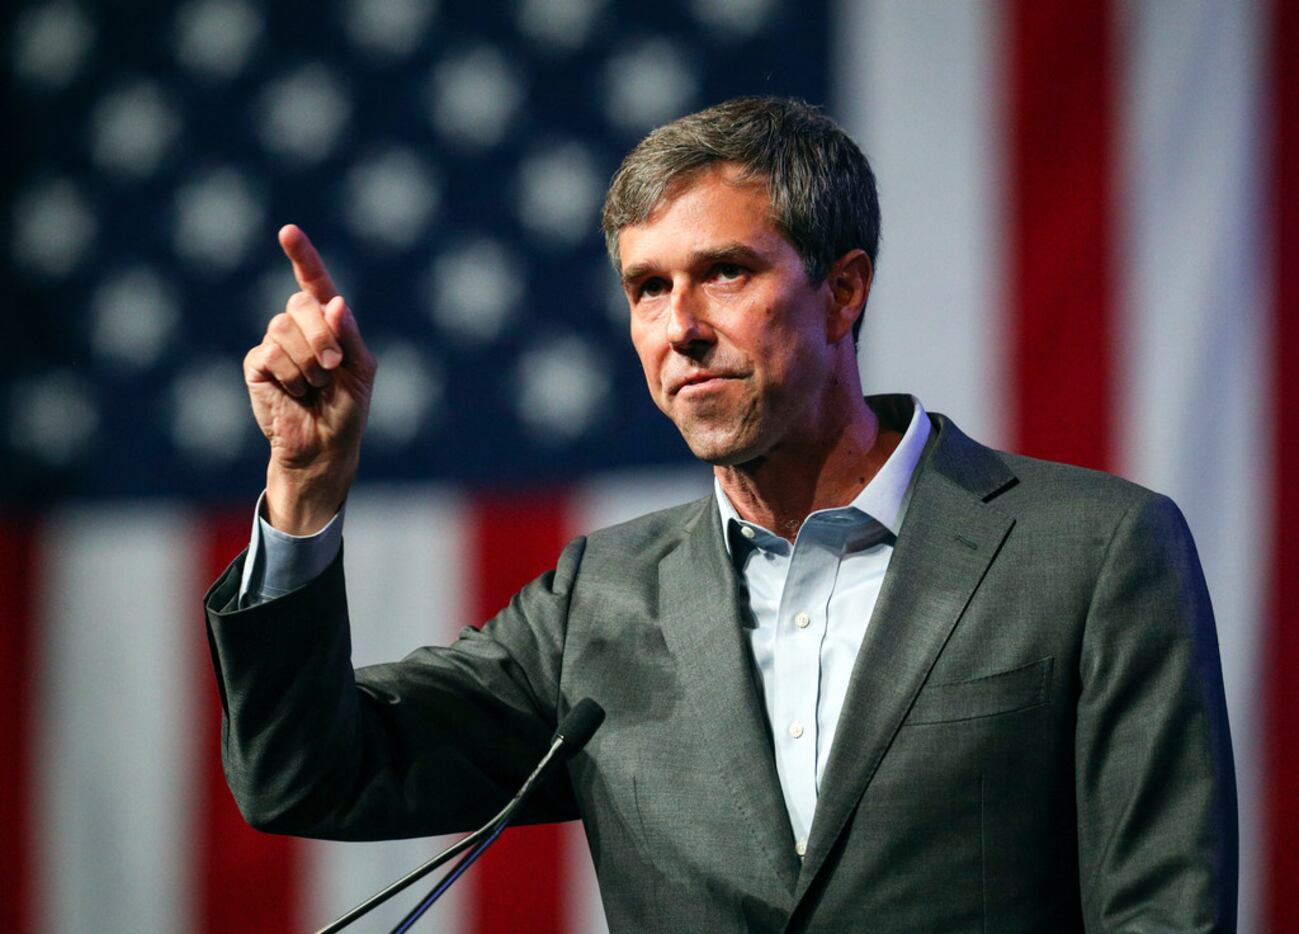 Rep. Beto O'Rourke speaks at the Texas Democratic Convention in Fort Worth on June 22, 2018.